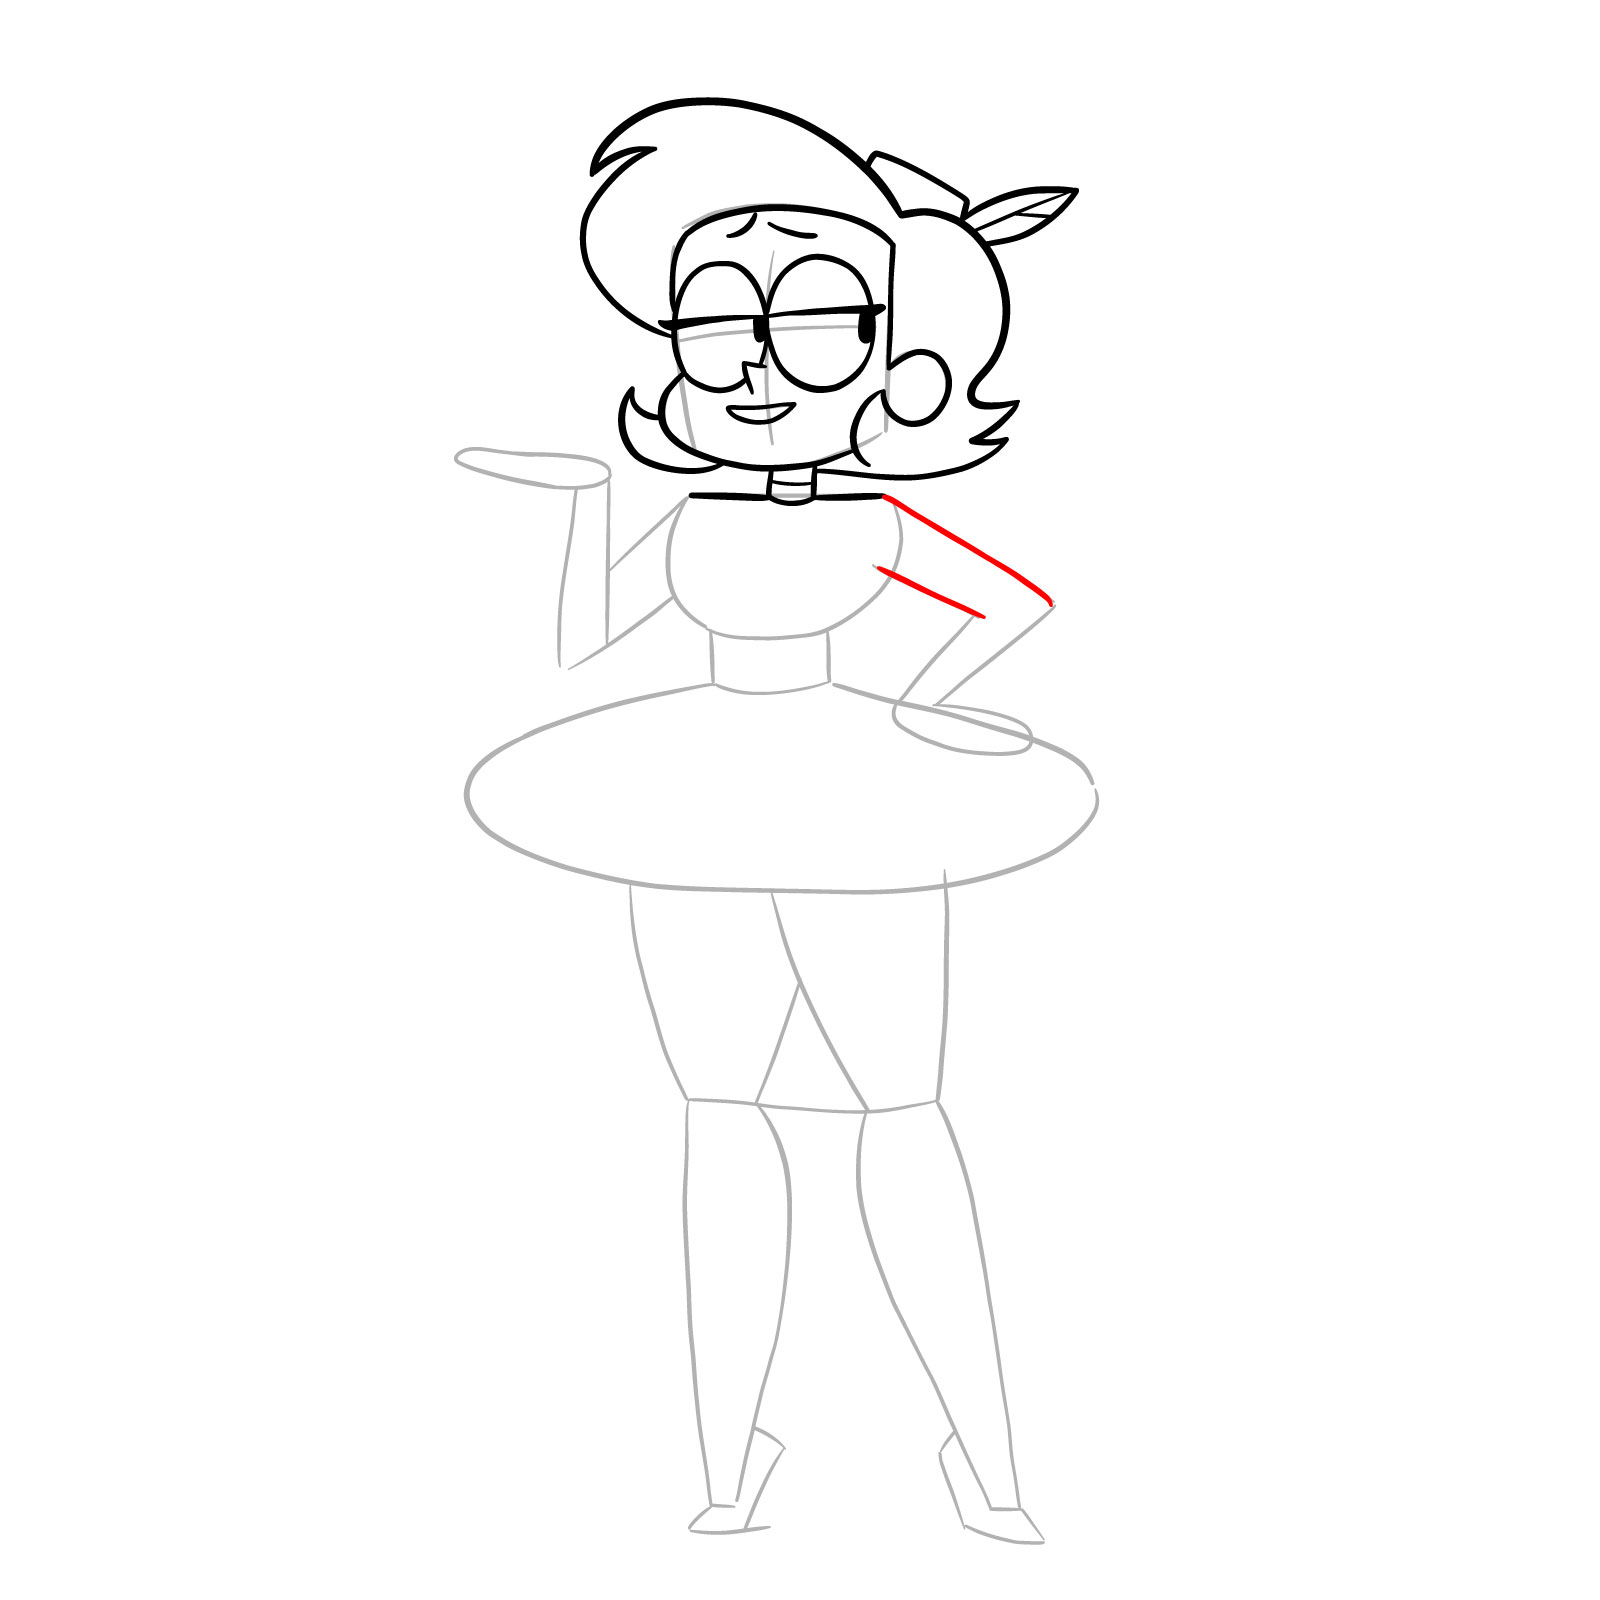 How to draw Elodie from OK K.O.! - step 16